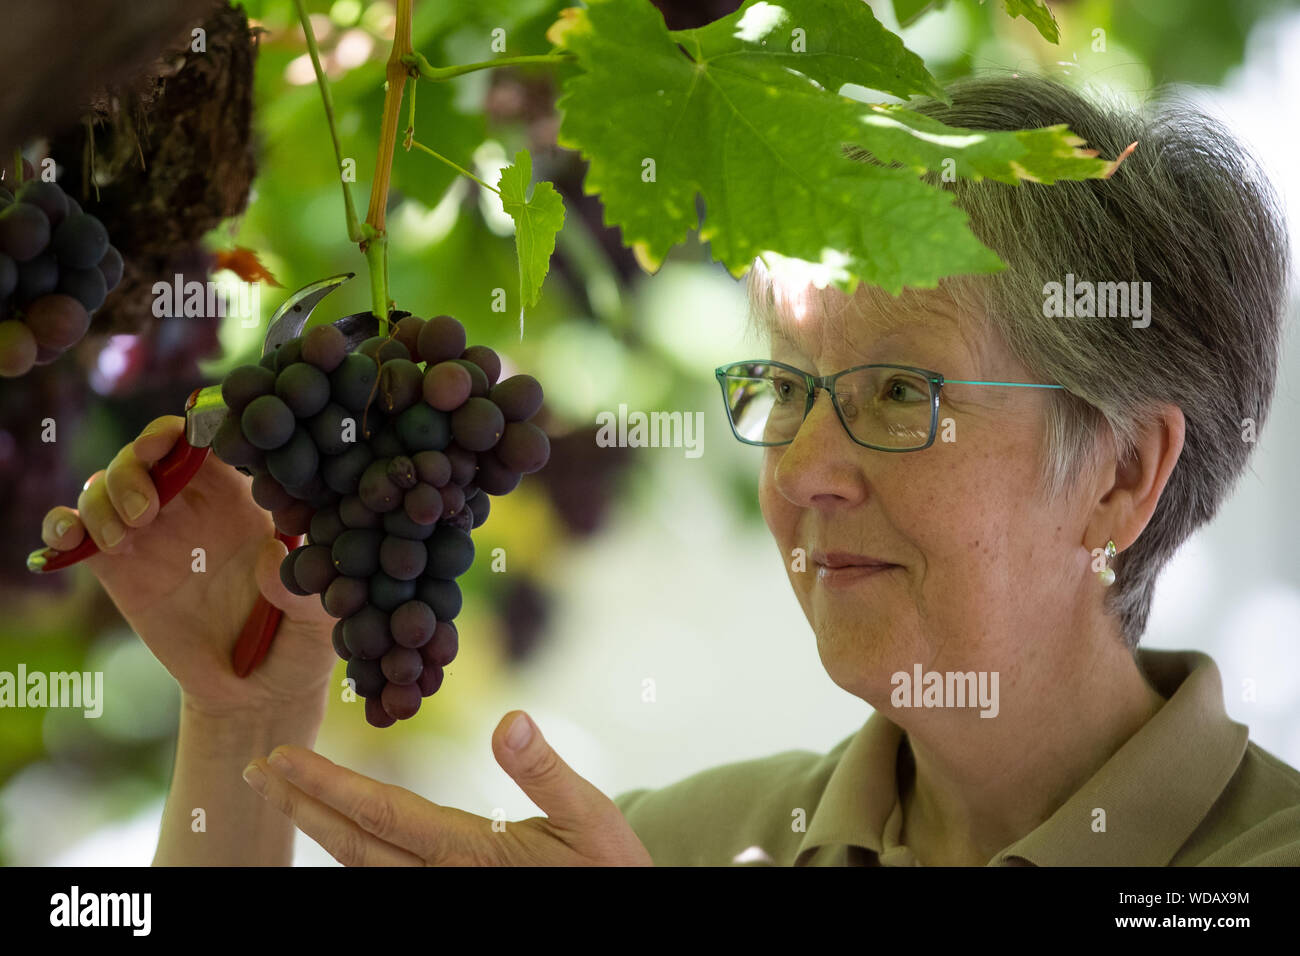 Gillian Strudwick keeper of the Great Vine inspects and cuts bunches of grapes during the Hampton Court grape vine harvest at Hampton Court Palace in Richmond, Surrey. Stock Photo